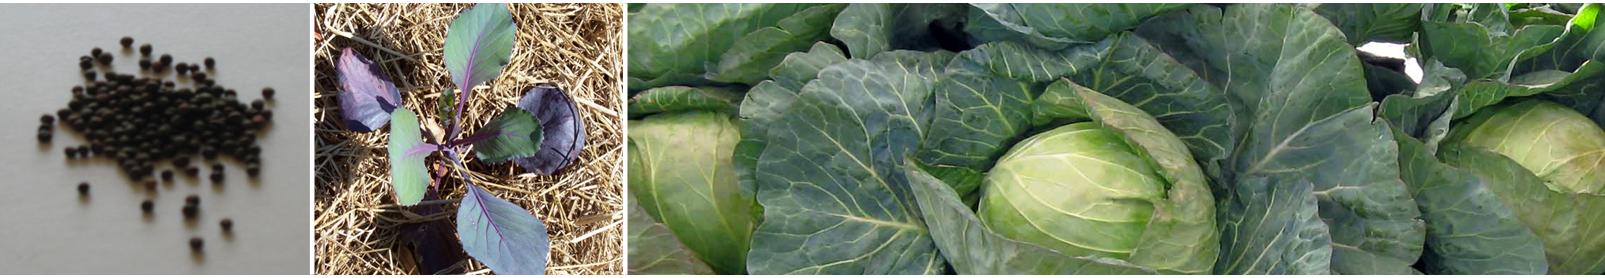 Cabbage Growth Explored: Seedling to Full Grown with Royal Seed's Collection